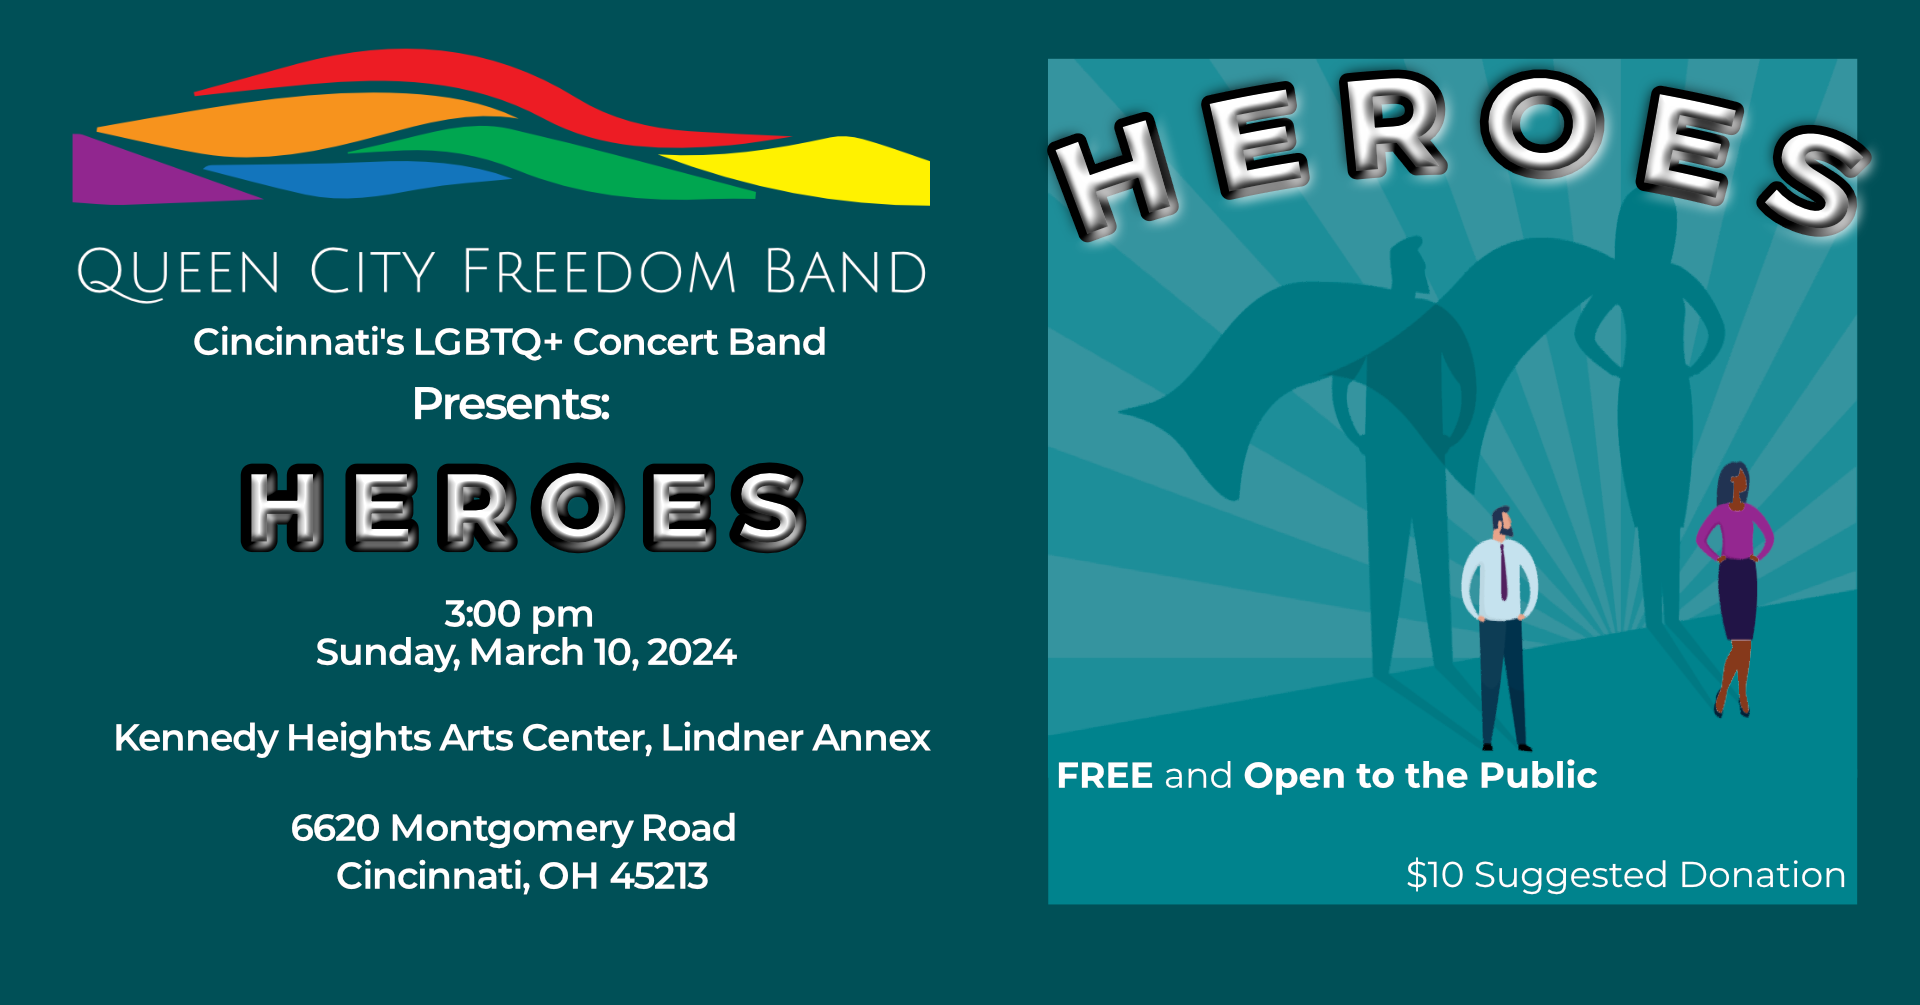 QCFB Heroes poster. Sunday March 10, 2024, 3pm at the Kennedy Heights Arts Center Lindner Annex